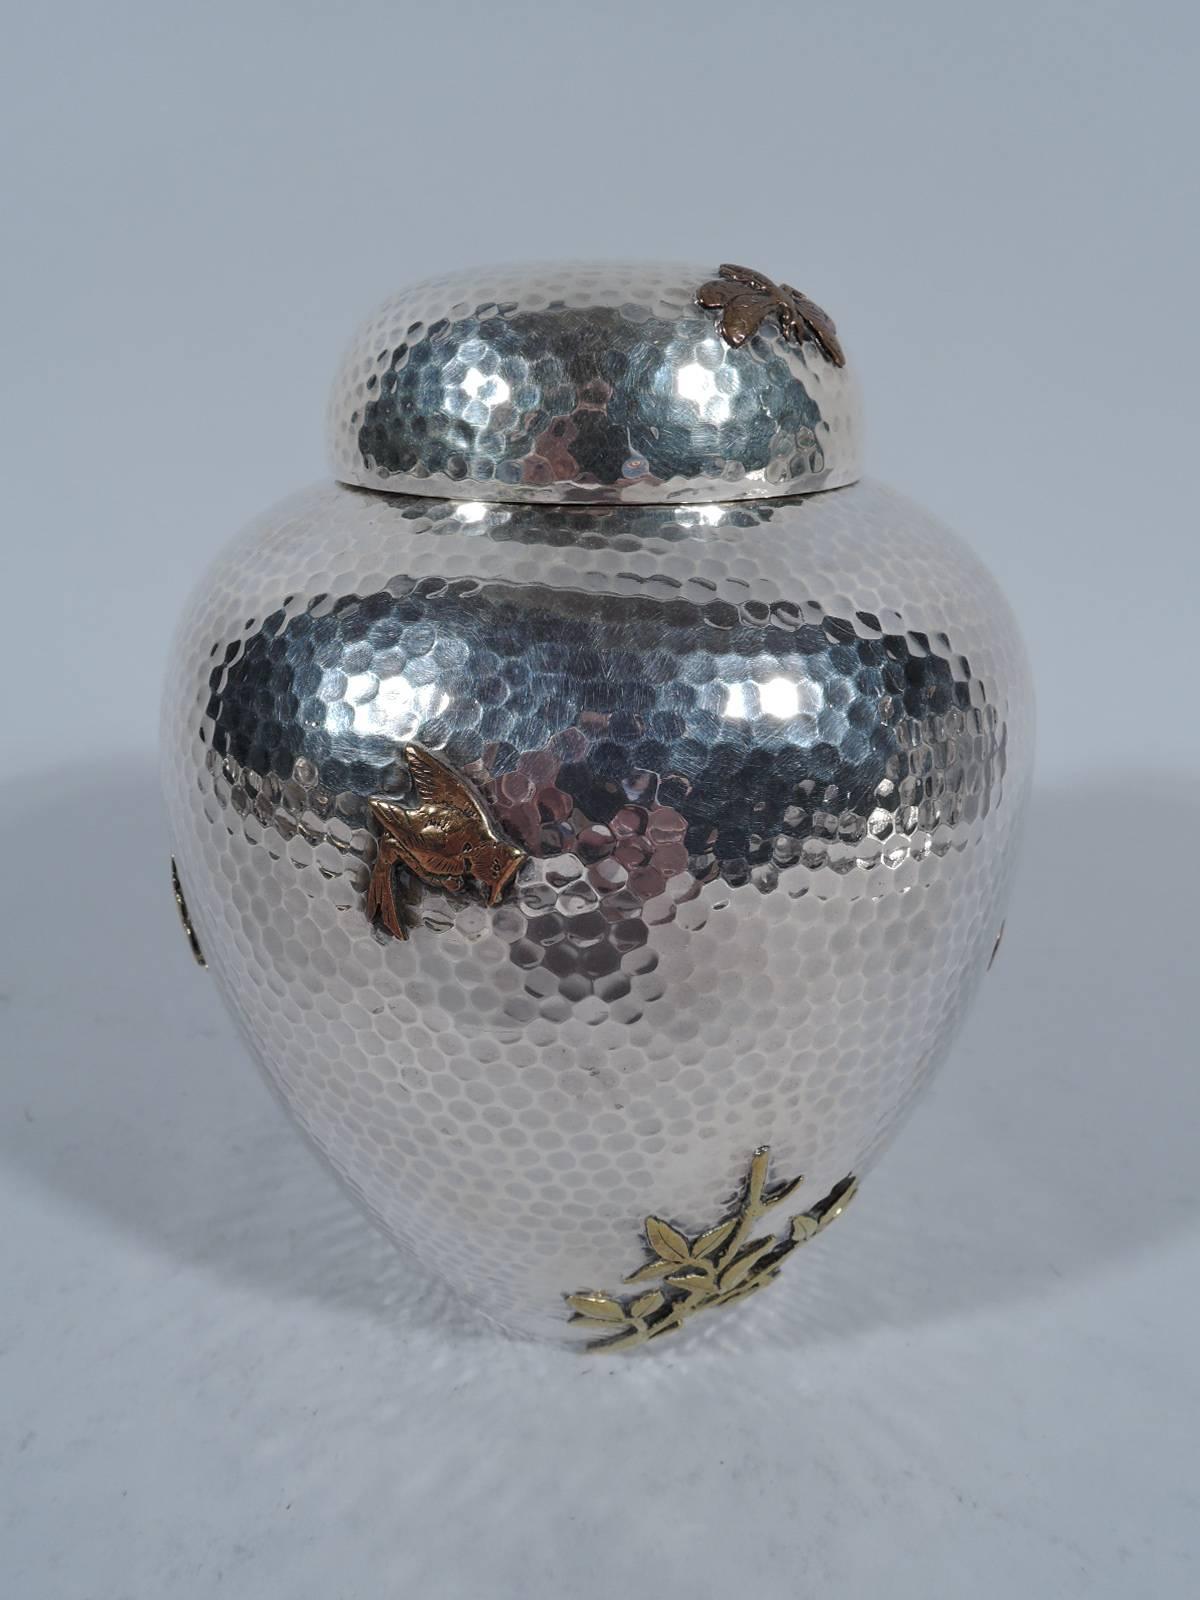 Large sterling silver and mixed metal tea caddy. Made by Dominick & Haff in New York in 1879. Ginger-jar form. Honeycomb hand hammering with applied butterflies, dragonfly, birds, lizard, bamboo, and blossoming prunus branch – a veritable panoply of